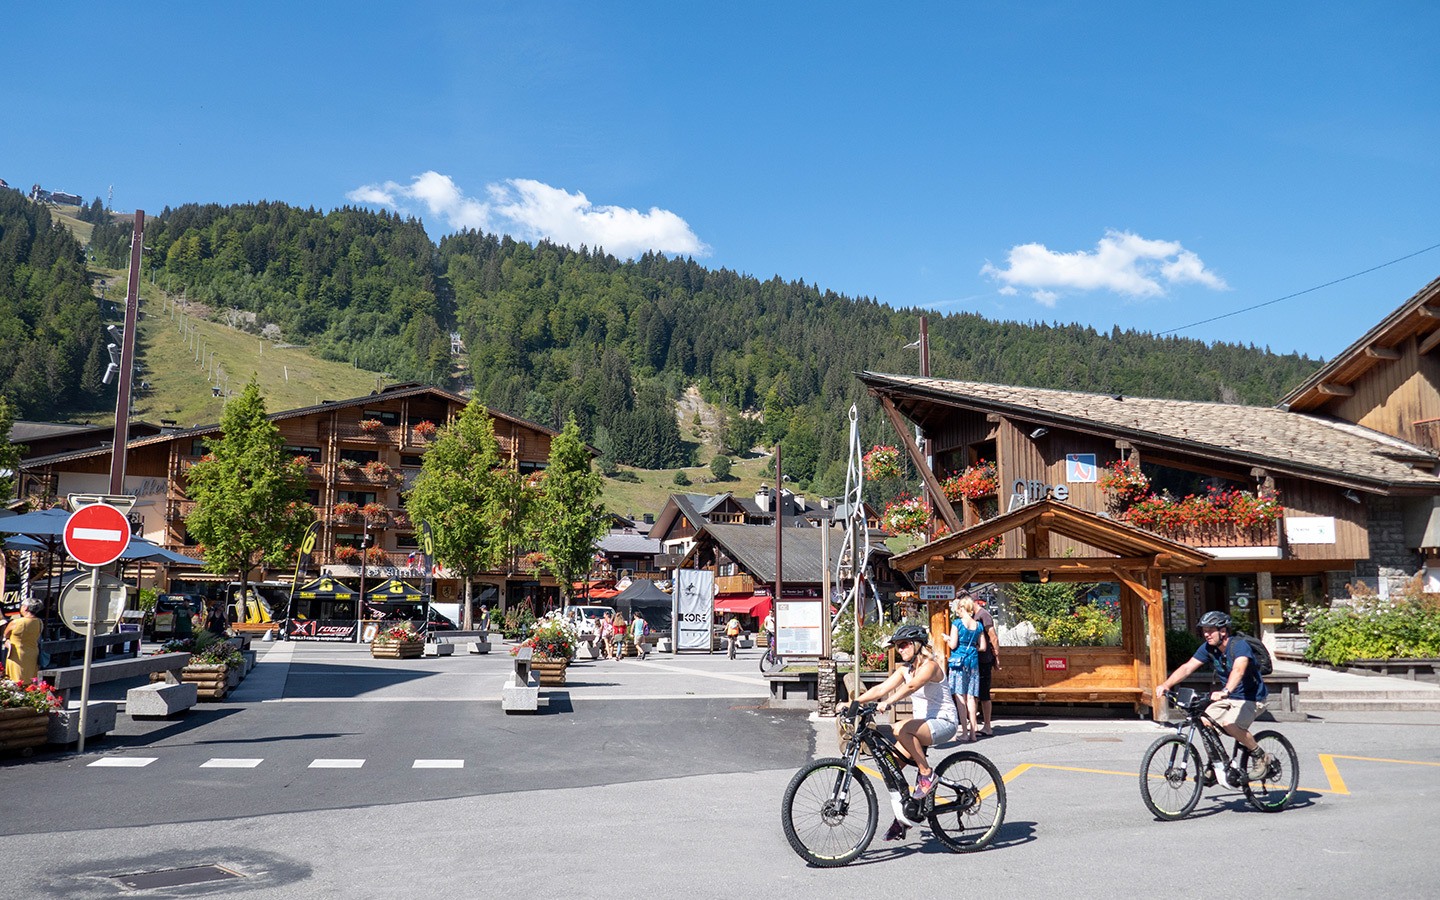 Bikers in the town of Morzine in the French Alps